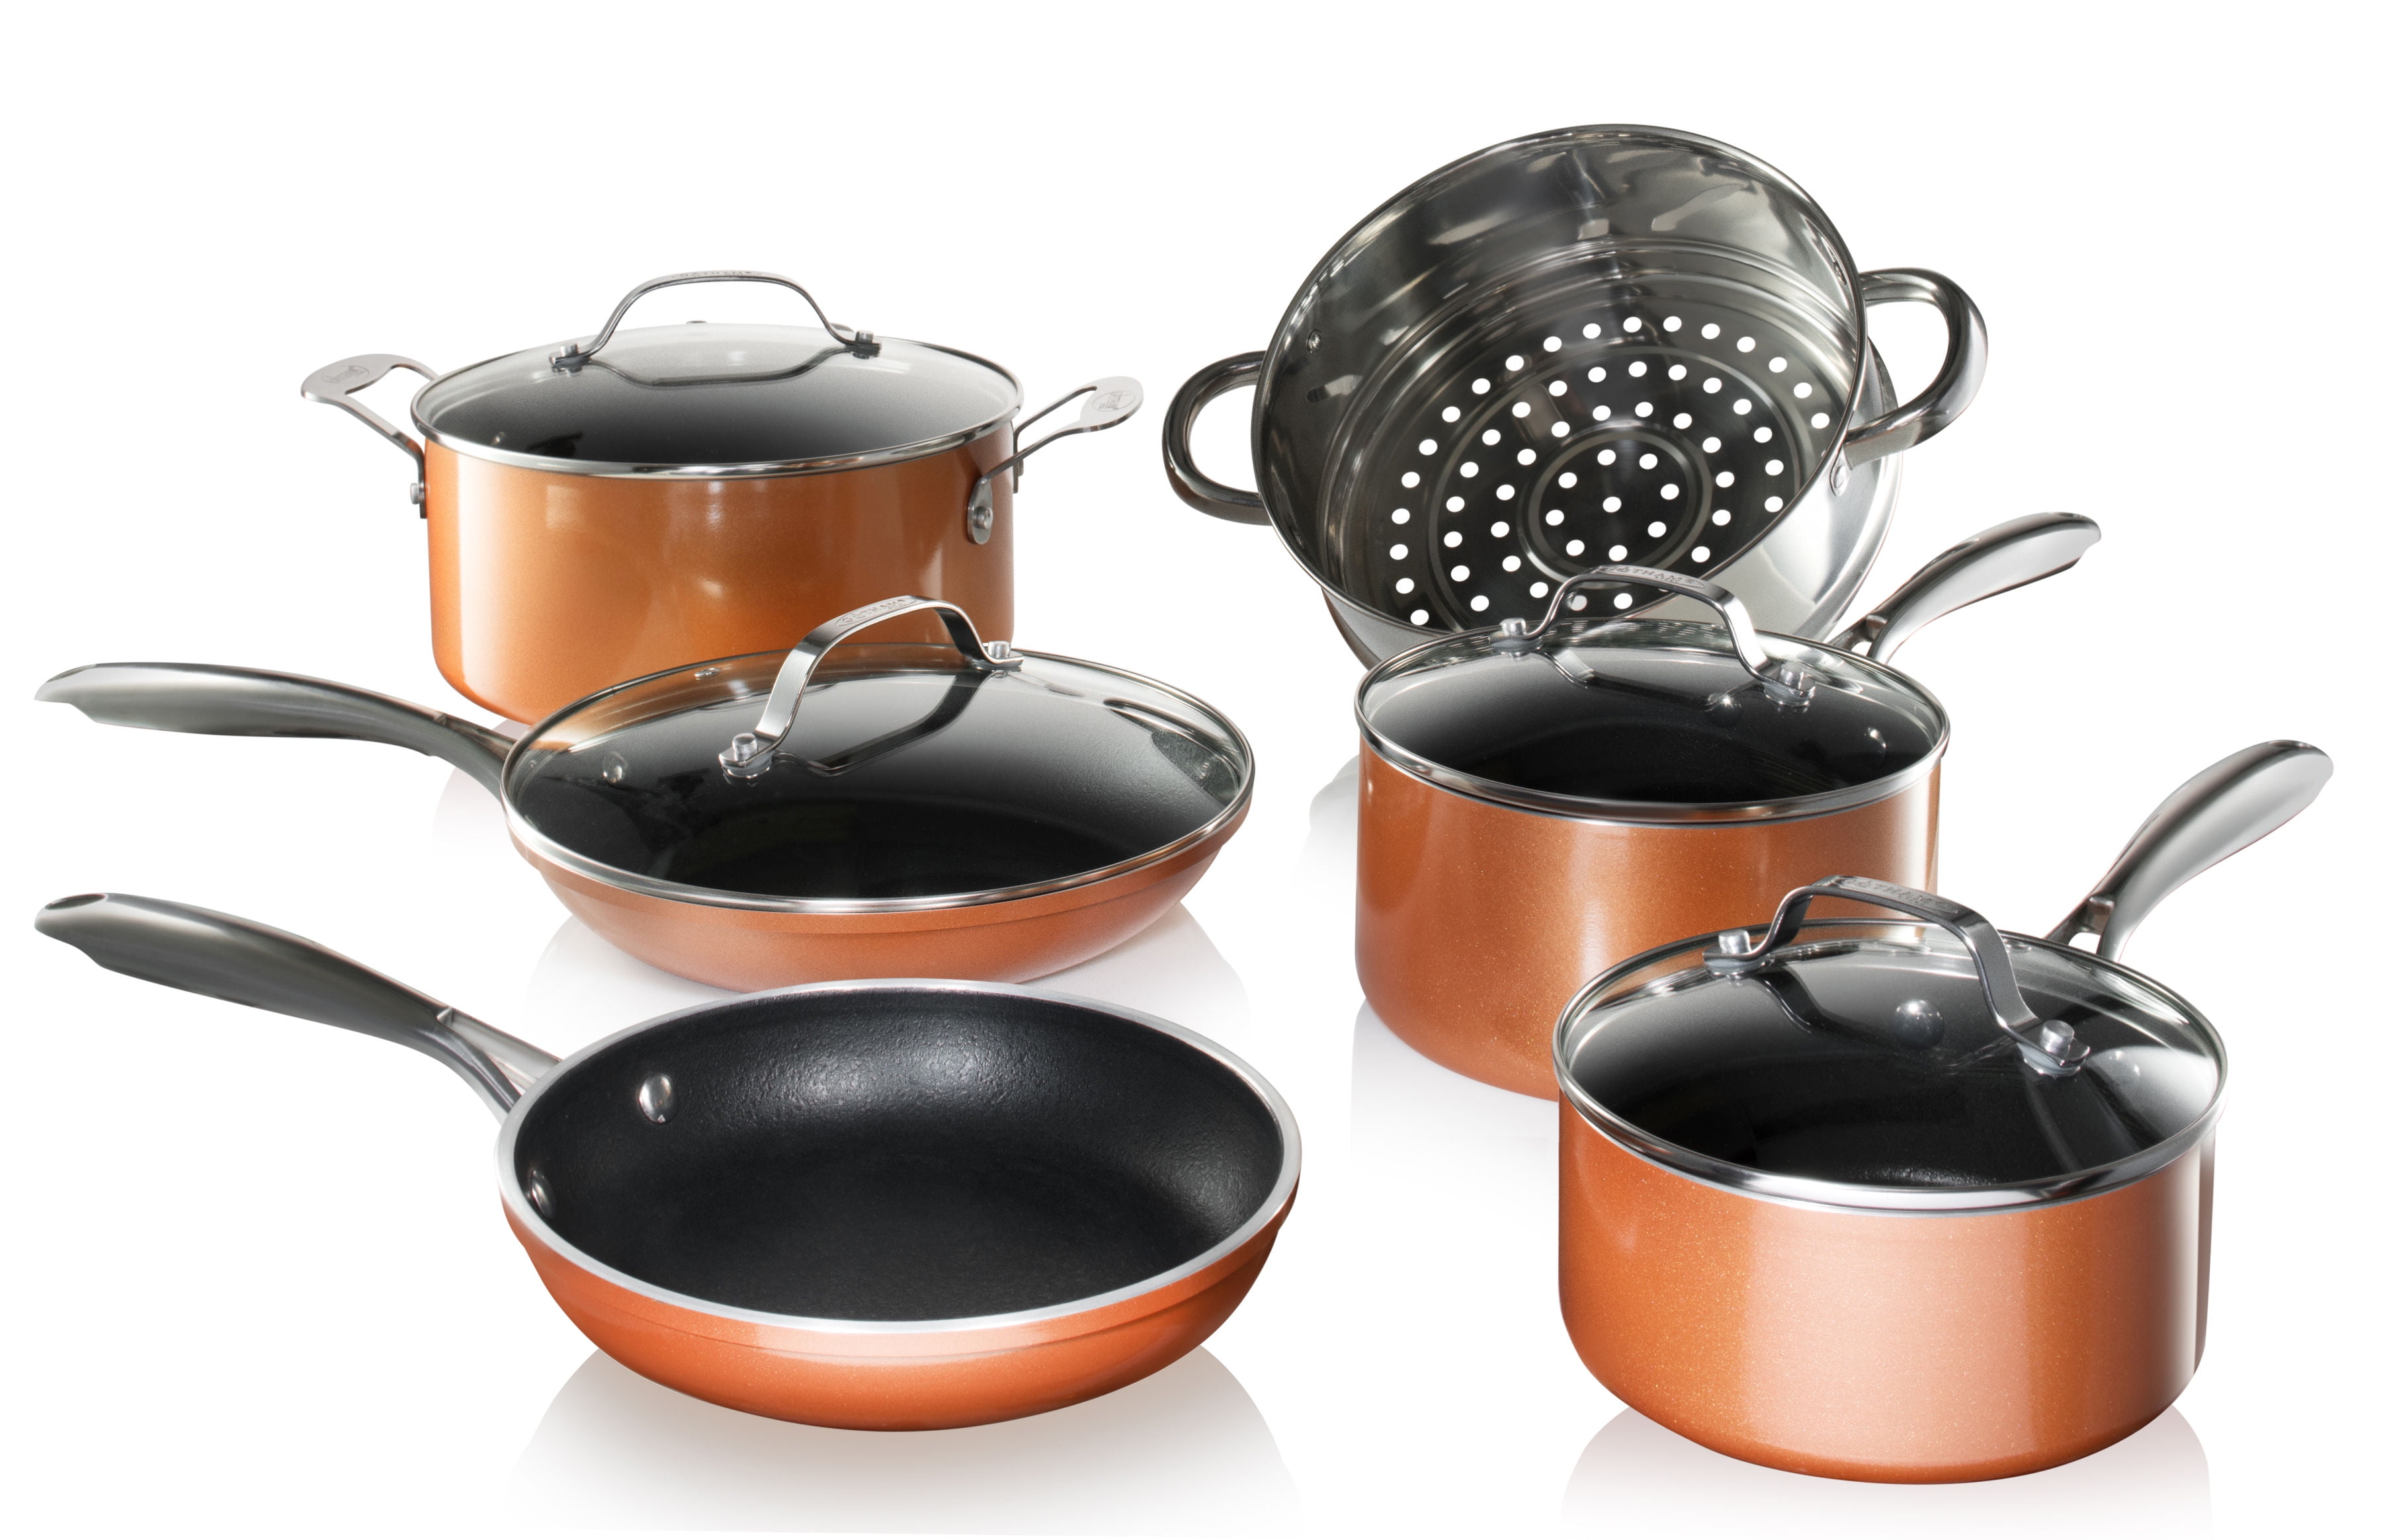 Gotham Steel Pots and Pans 10 Piece Cookware Set with Nonstick Ceramic Coating & 6 Quart XL Nonstick Copper Deep Square All in One 6 Qt Casserole Chef‘s Pan & Stock Pot 4 Piece Set 